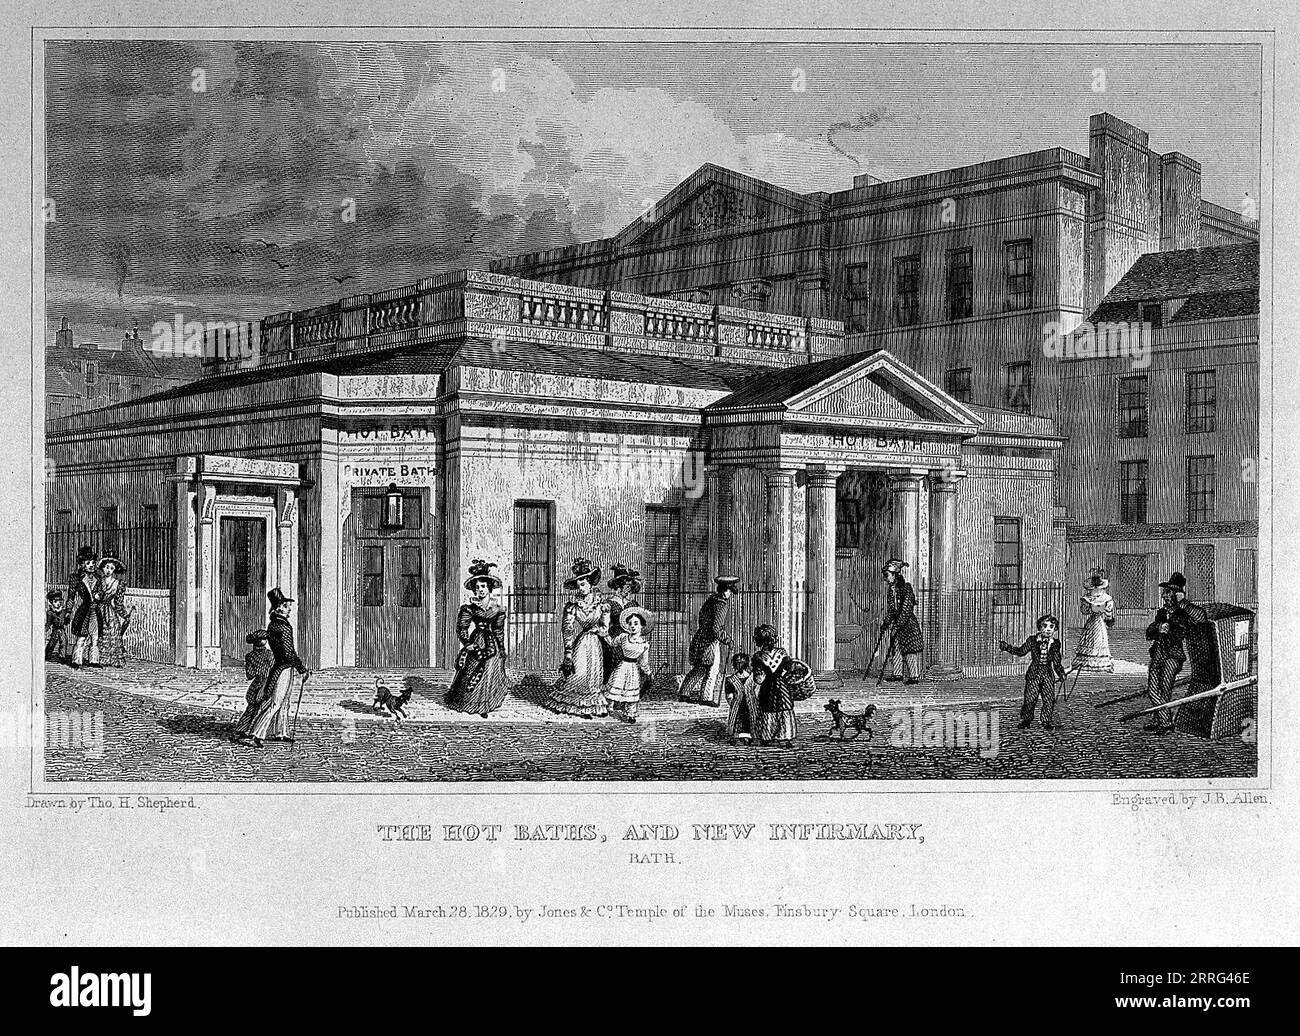 The Hot baths and New infirmary, Bath. Steel engraving by J.B. Allen 1829 after Thomas Hosmer Shepherd. Stock Photo